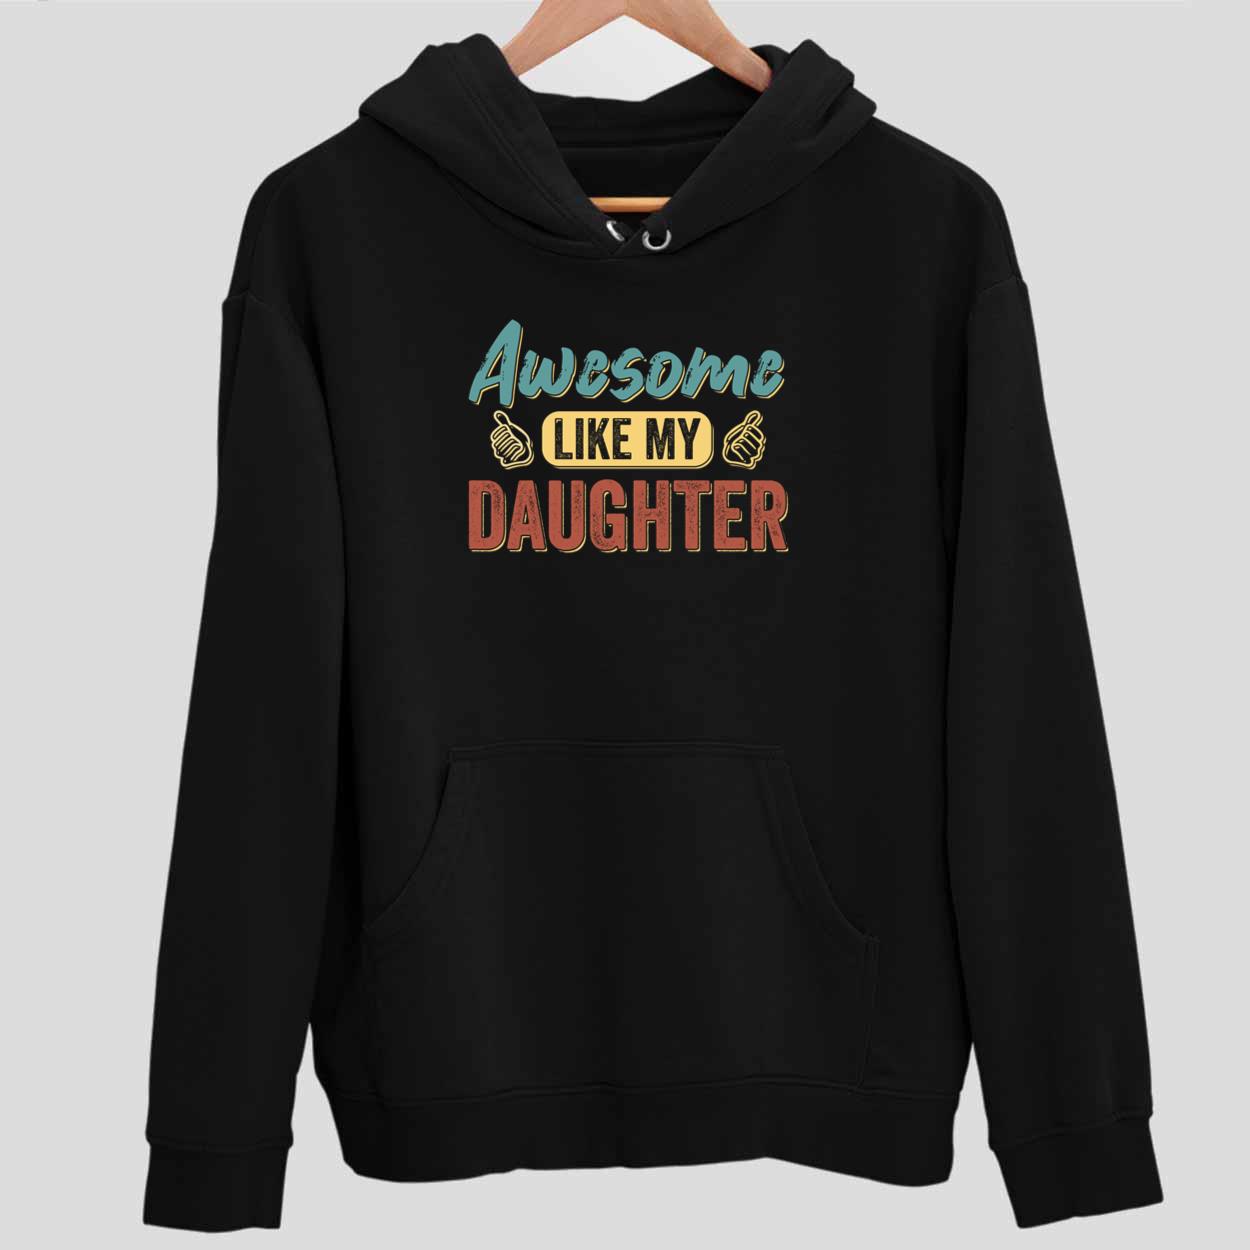 Awesome Like My Daughter Shirt 